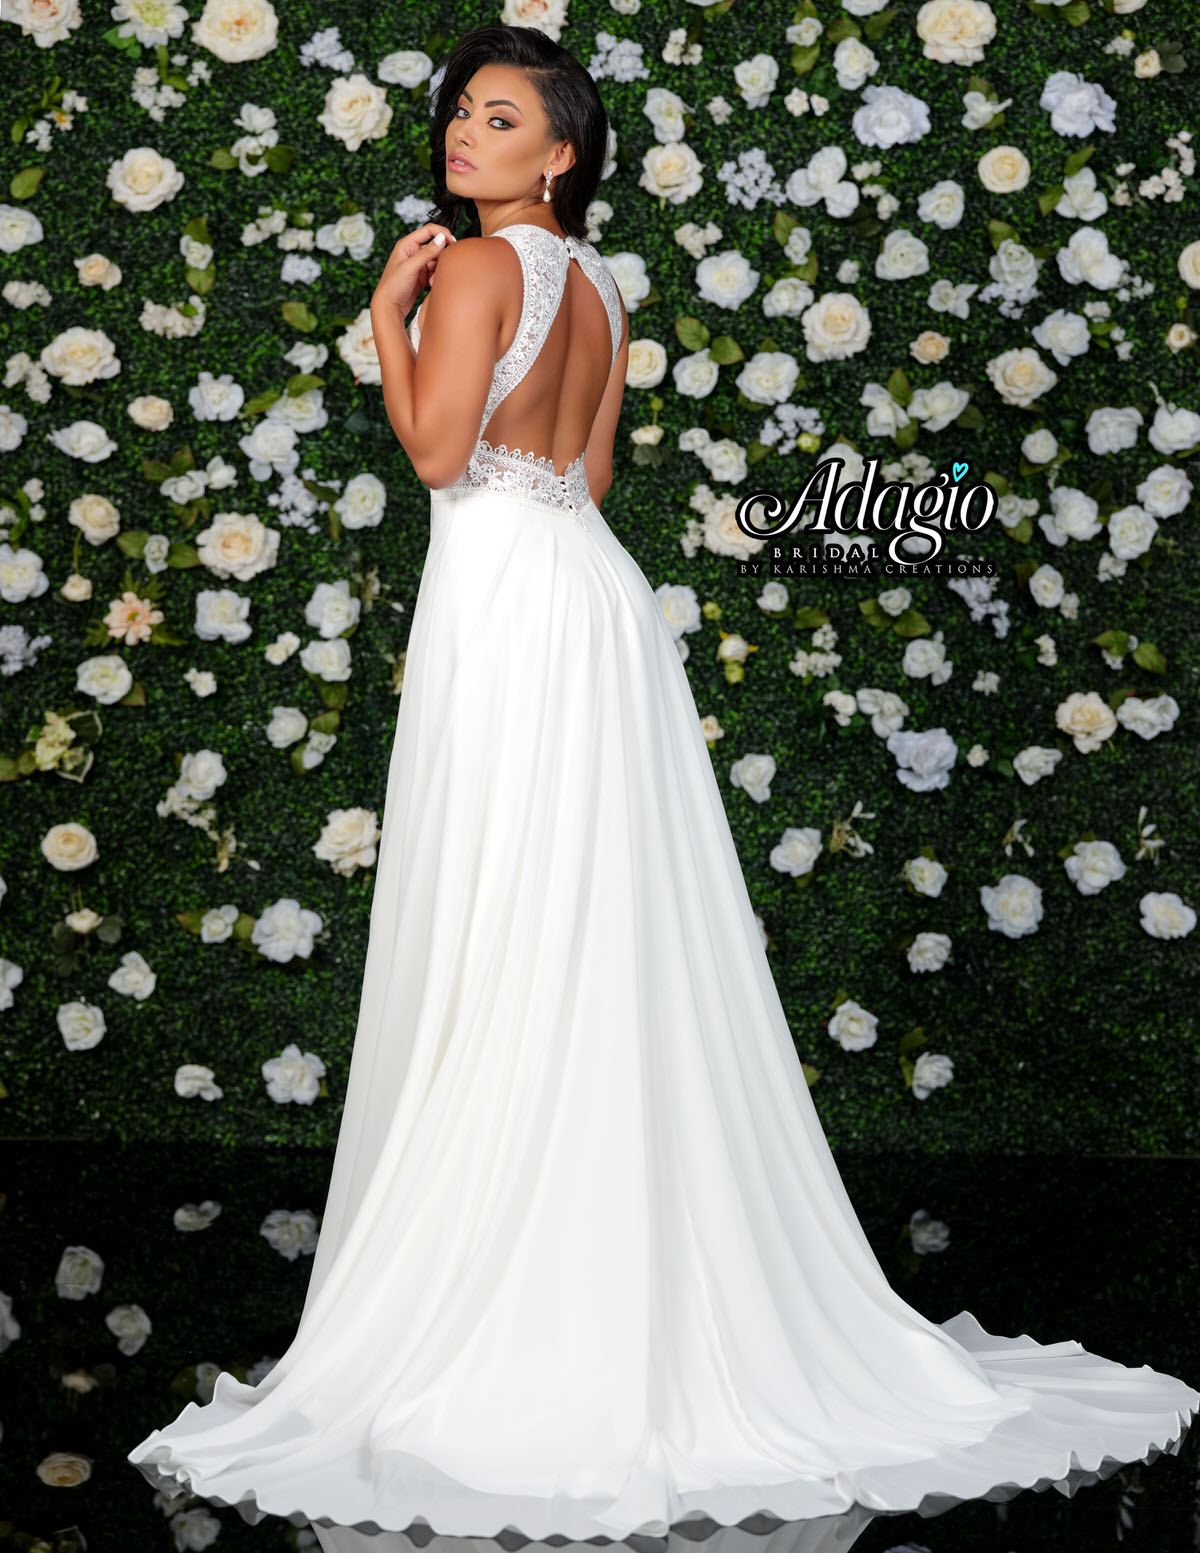 Adagio Bridal W9342 v neckline applique lace bodice chiffon A line wedding dress bridal gown. Plunging V Neckline with sheer illusion lace wrapping around to create a keyhole cutout open back. very lush chiffon skirt with sweeping train.  Available colors:  White  Available sizes:  8